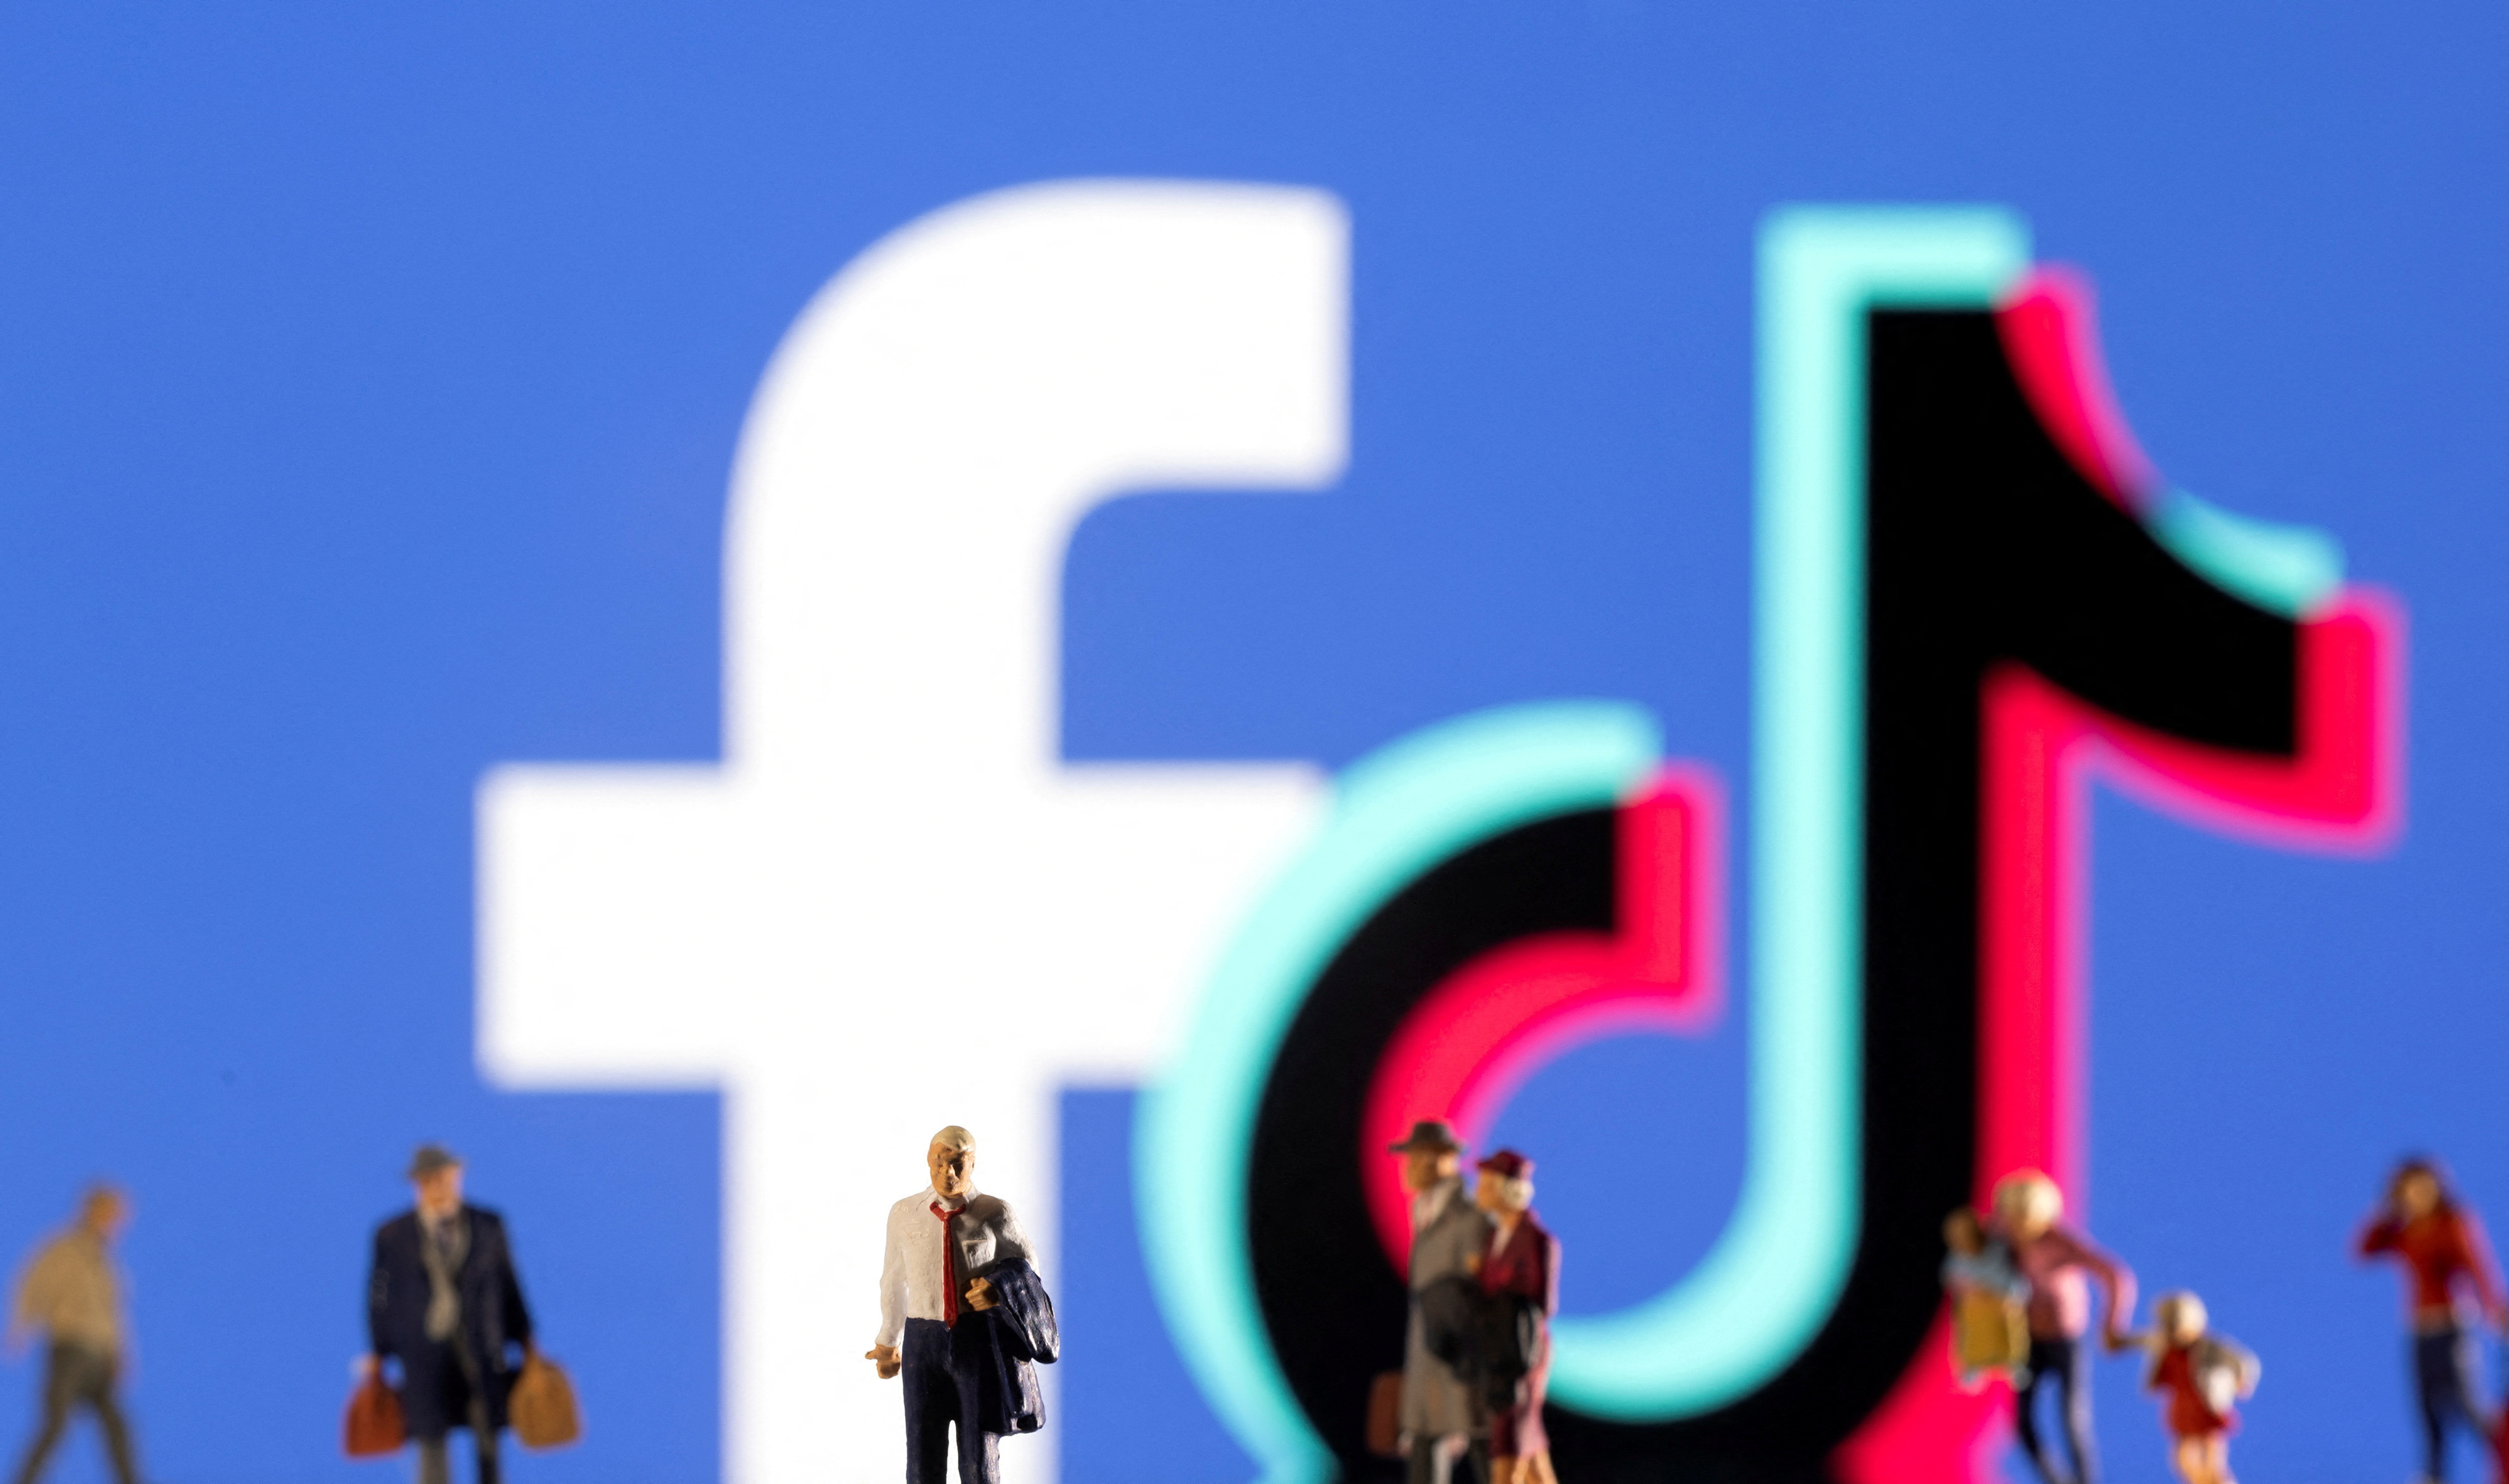 Illustration shows small figurines and displayed Tik Tok and Facebook logos